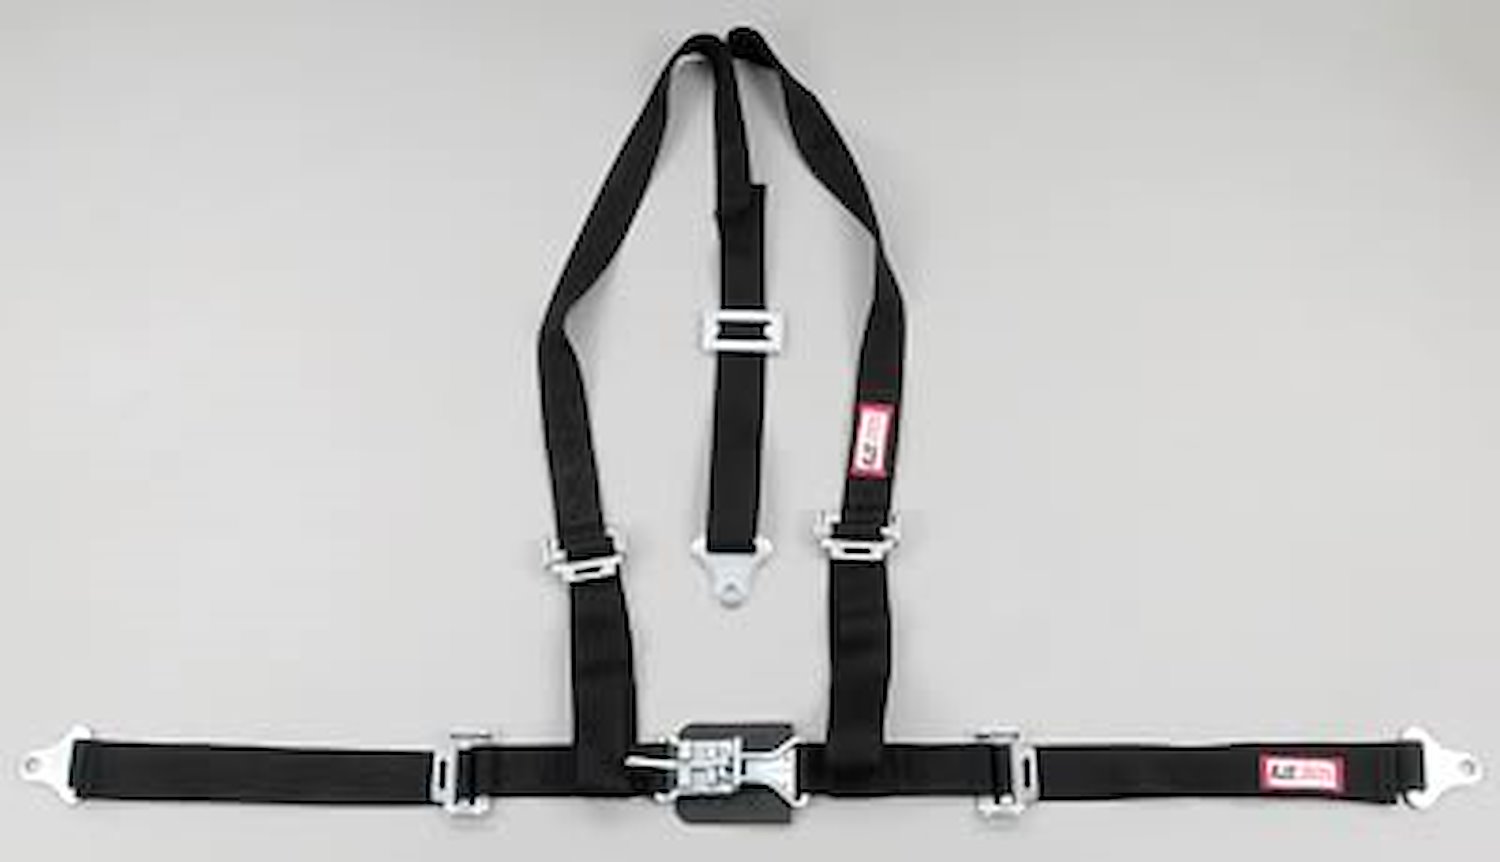 NON-SFI L&L HARNESS 2 PULL UP Lap Belt BOLT SEWN IN 2 S.H. Y FLOOR Mount w/STERNUM STRAP WRAP/BOLT HOT PINK